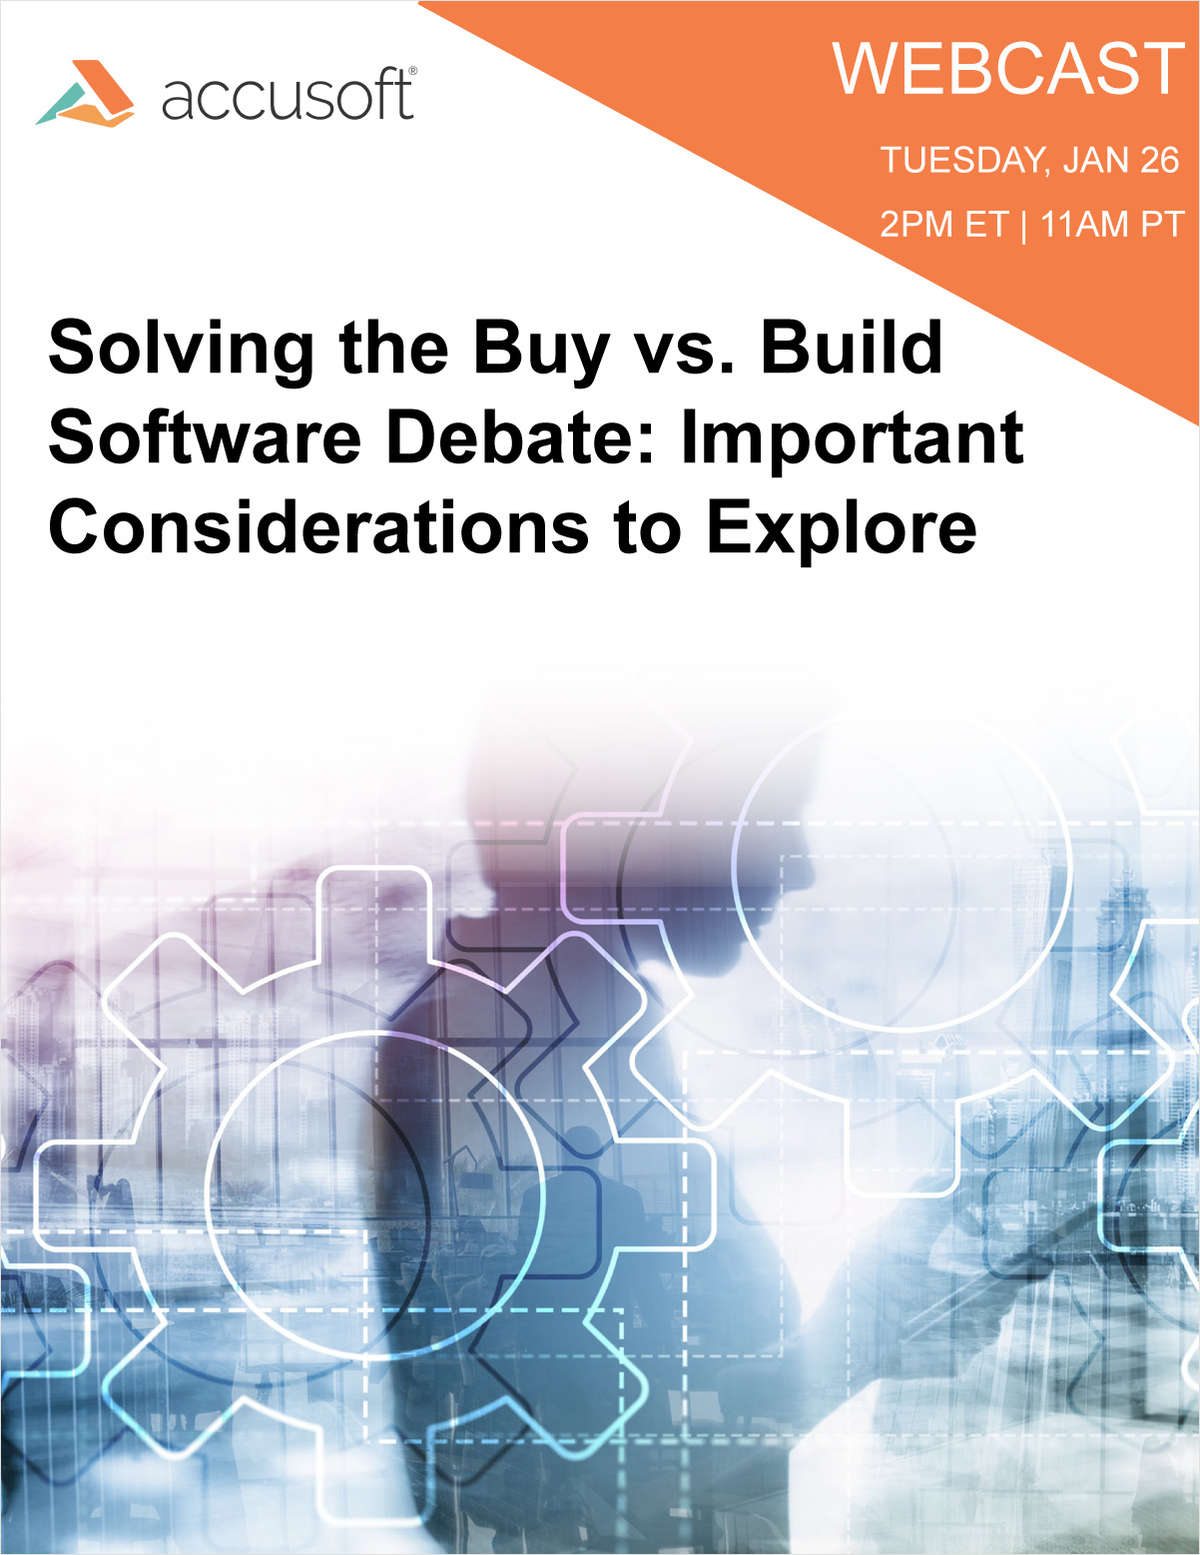 Solving the Buy vs. Build Software Debate: Important Considerations to Explore